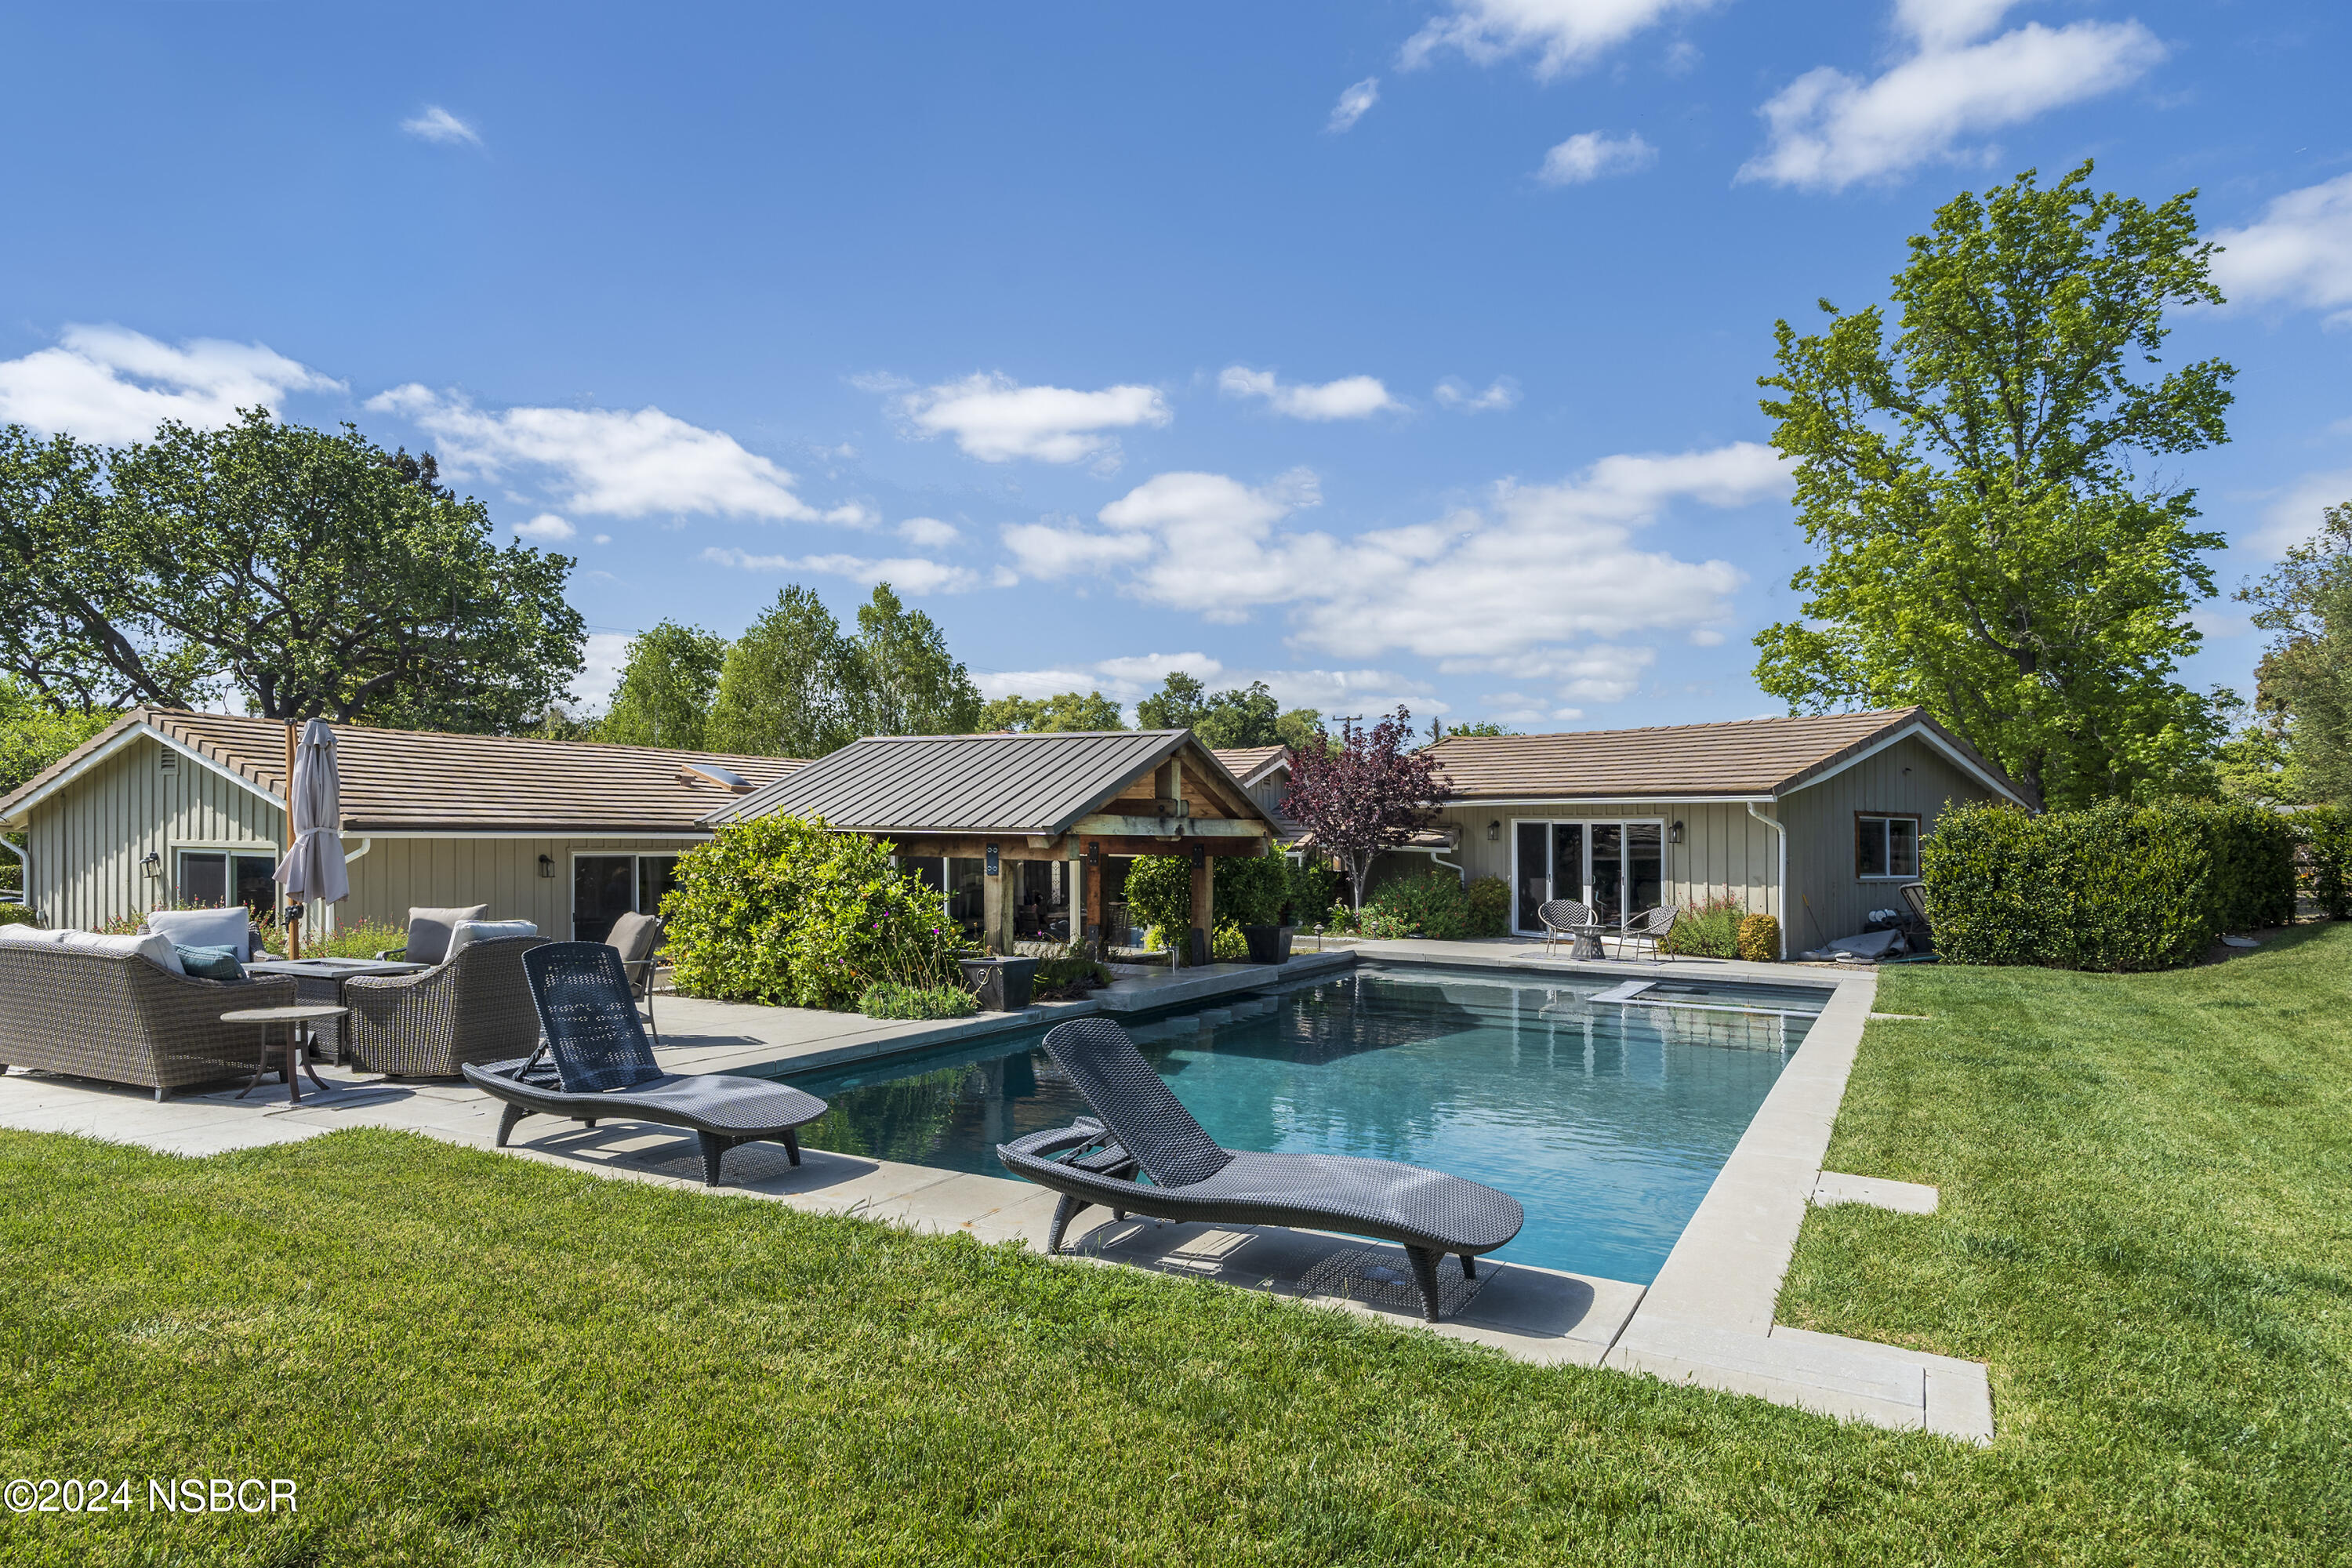 a view of house with swimming pool yard fire pit and outdoor seating